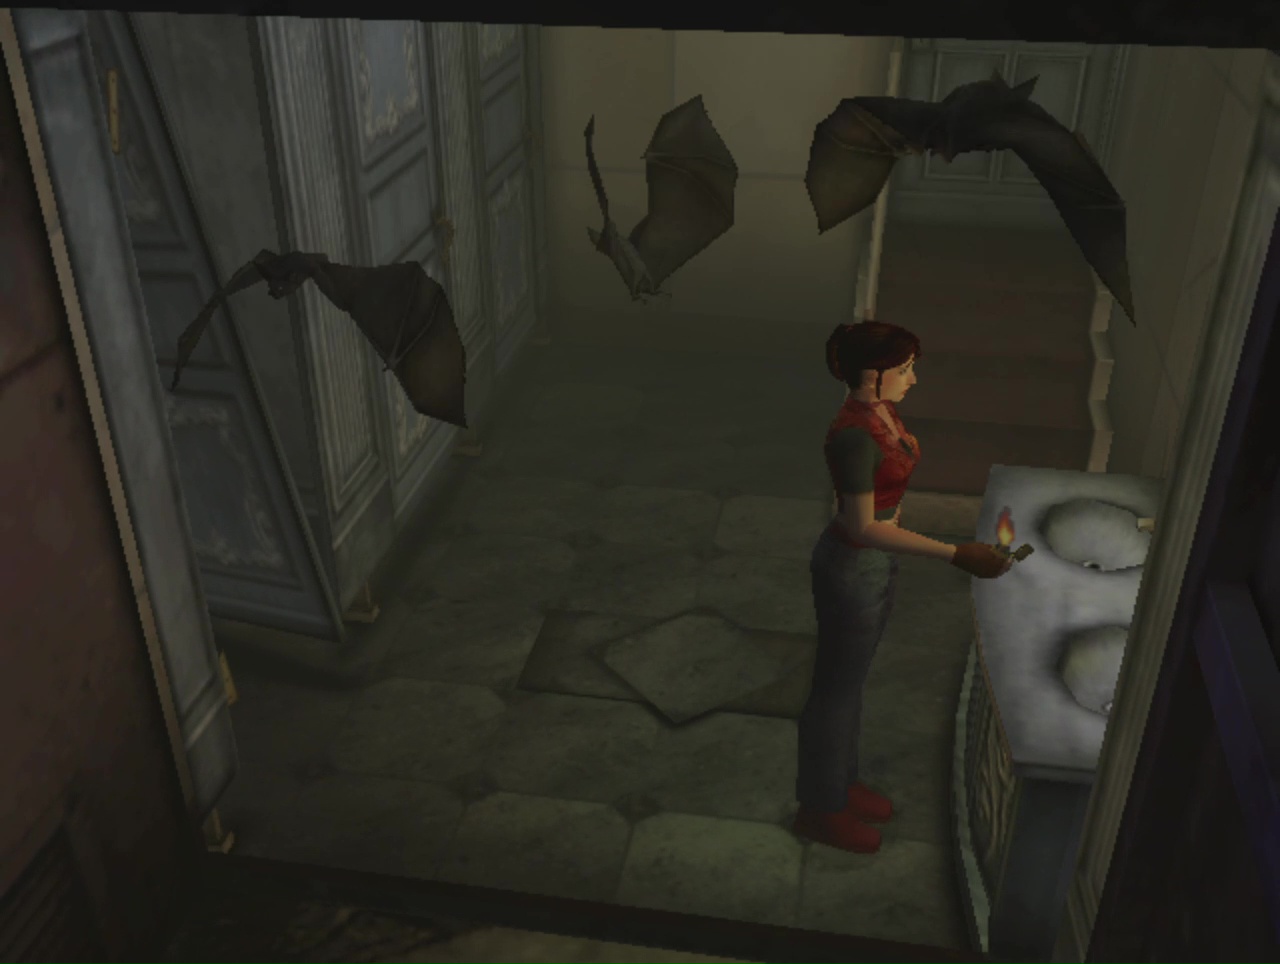 Review: “Resident Evil: Code Veronica X” (Playstation 2 Game)